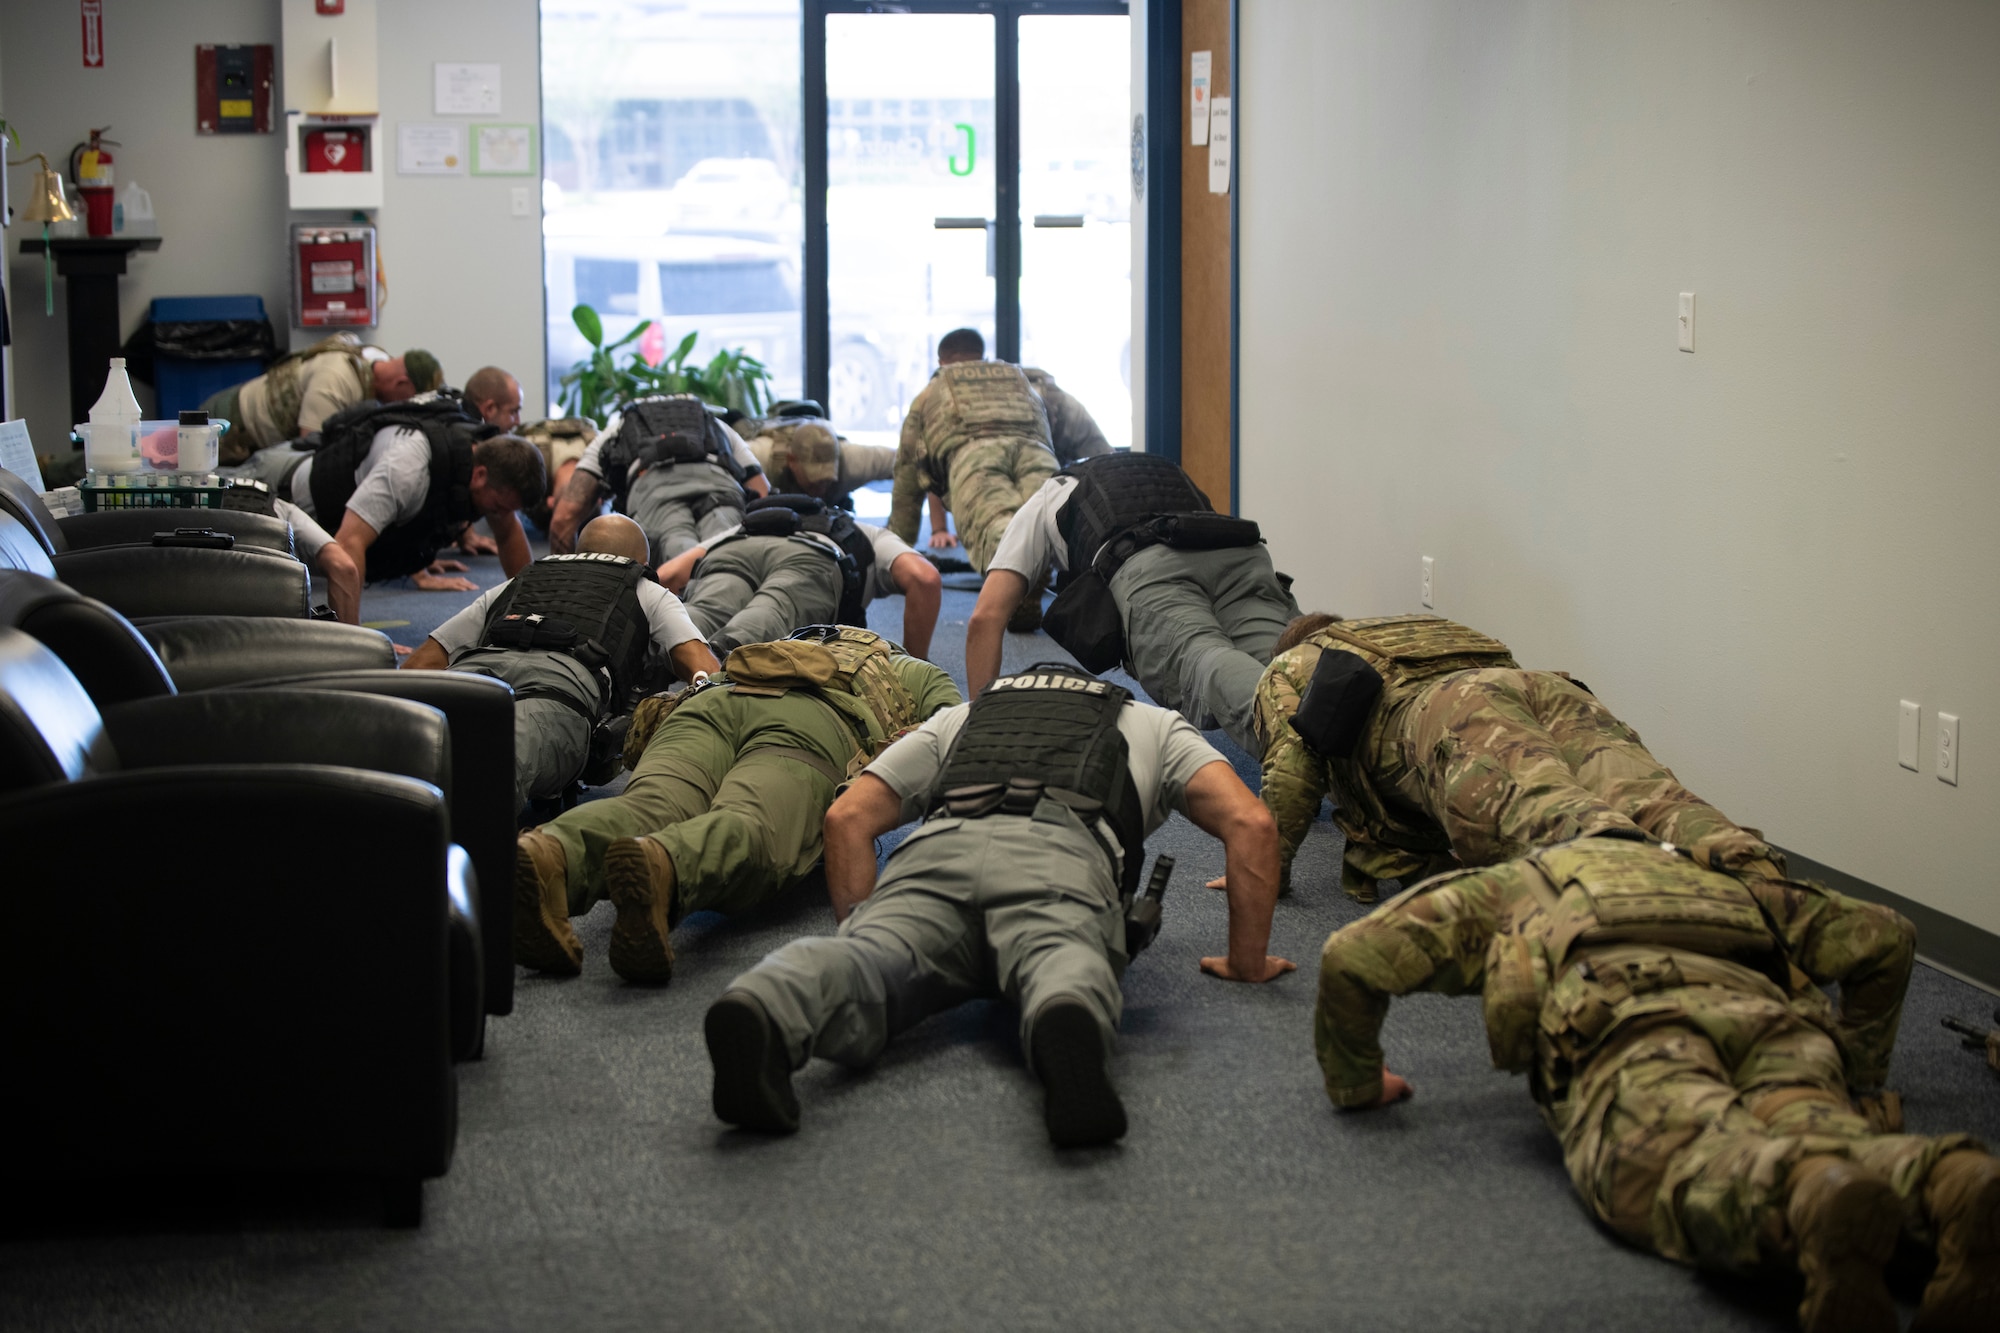 Members of the Bay County Sheriff’s Office and Panama City Police Department special weapons and tactics team perform push-ups with 325th Security Forces Squadron tactical response team members during a training exercise in Panama City, Florida, July 13, 2021. Various exercises were used as a team building tool to foster a “one team, one fight” mentality between the participating units. (U.S. Air Force photo by Staff Sgt. Stefan Alvarez)